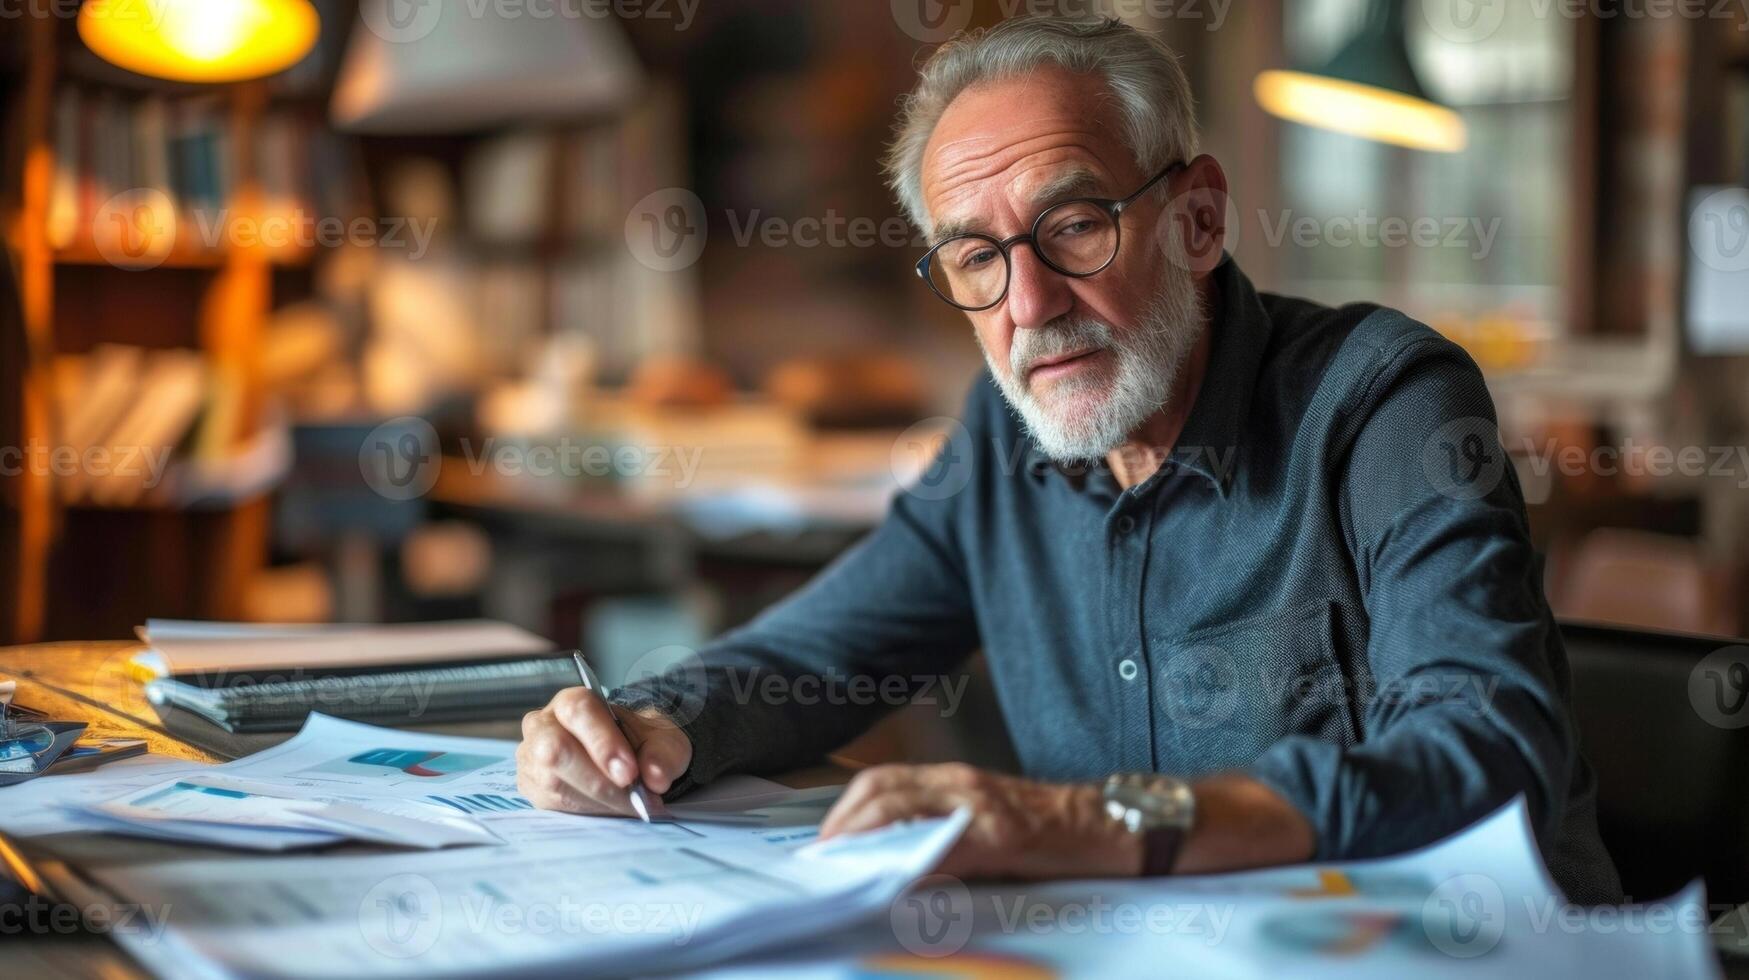 A senioraged man sitting at a desk piled high with papers intently analyzing his retirement accounts and working on a budget plan to ensure a financially secure future photo